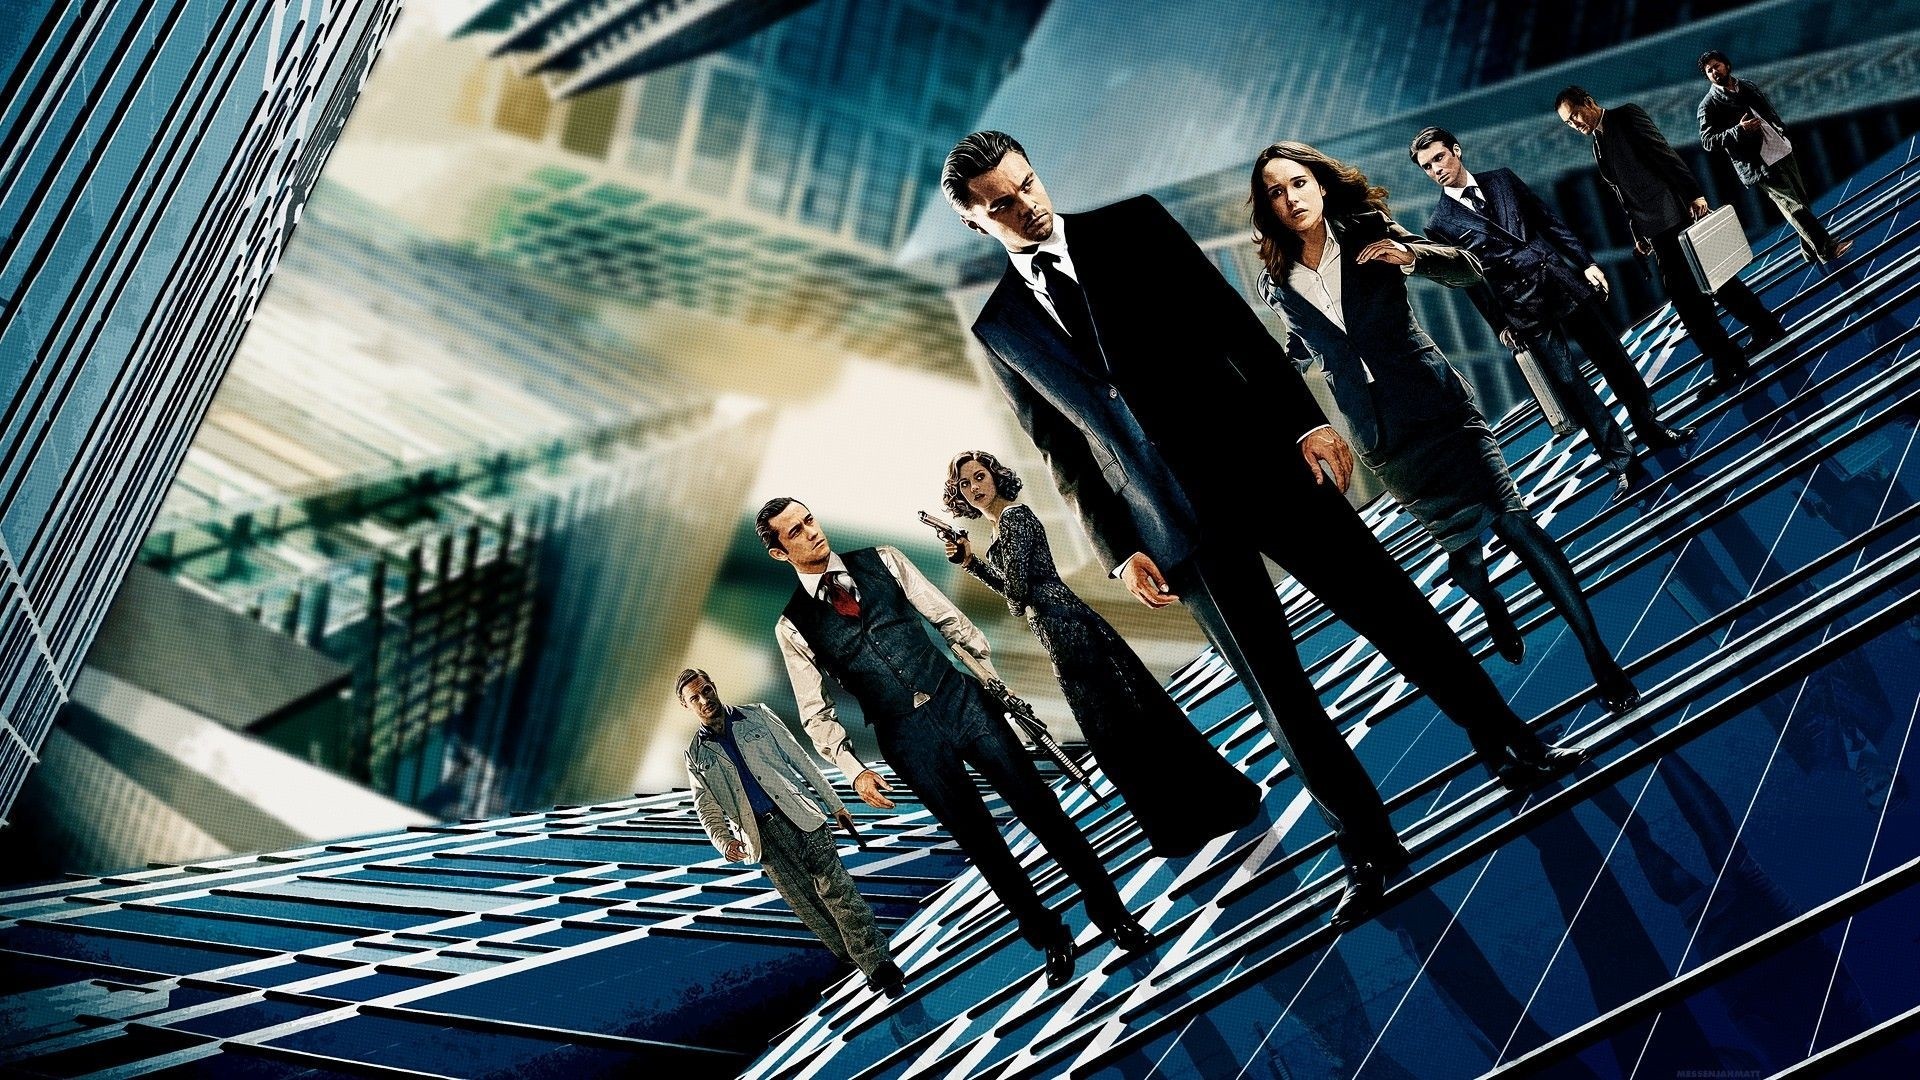 Inception Wallpaper Image